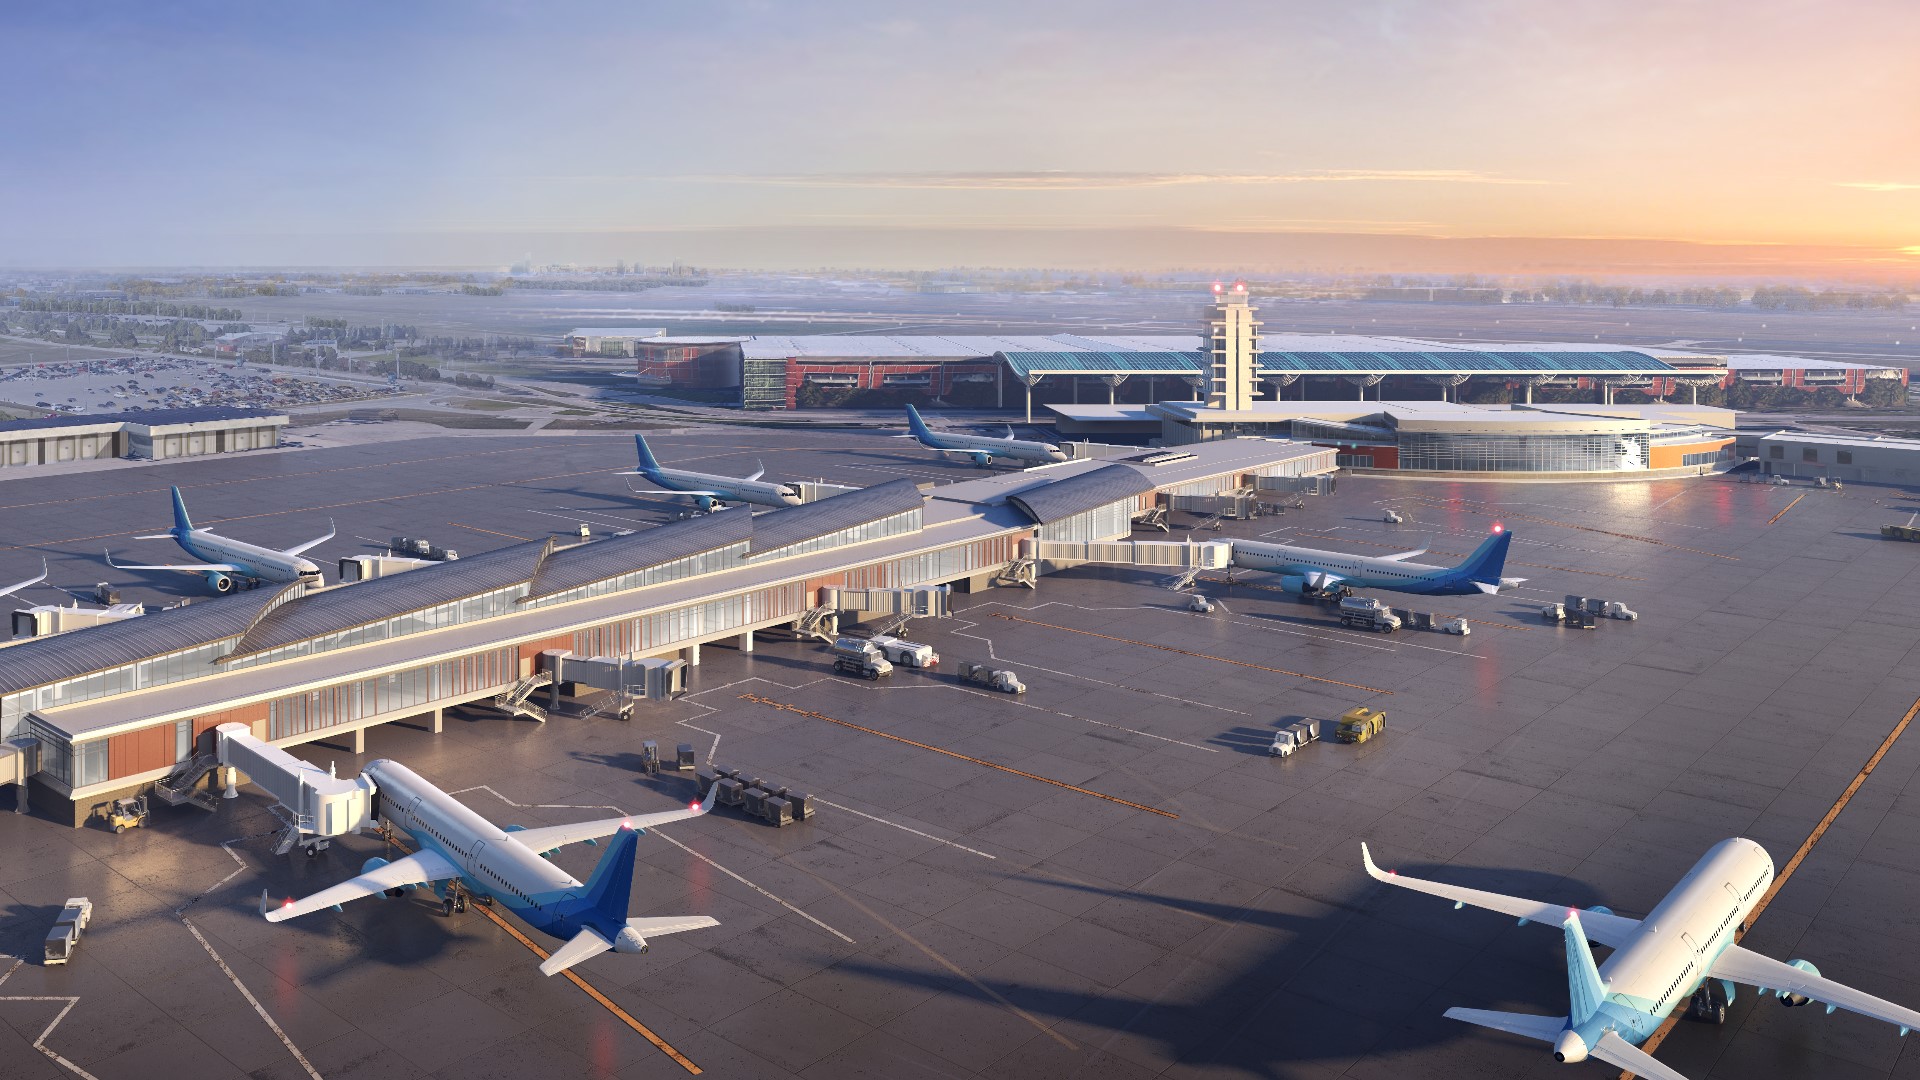 The Gerald R. Ford International Airport made two big announcements Wednesday: Plans for a $90 million expansion and a new airline service flying out of Grand Rapids.